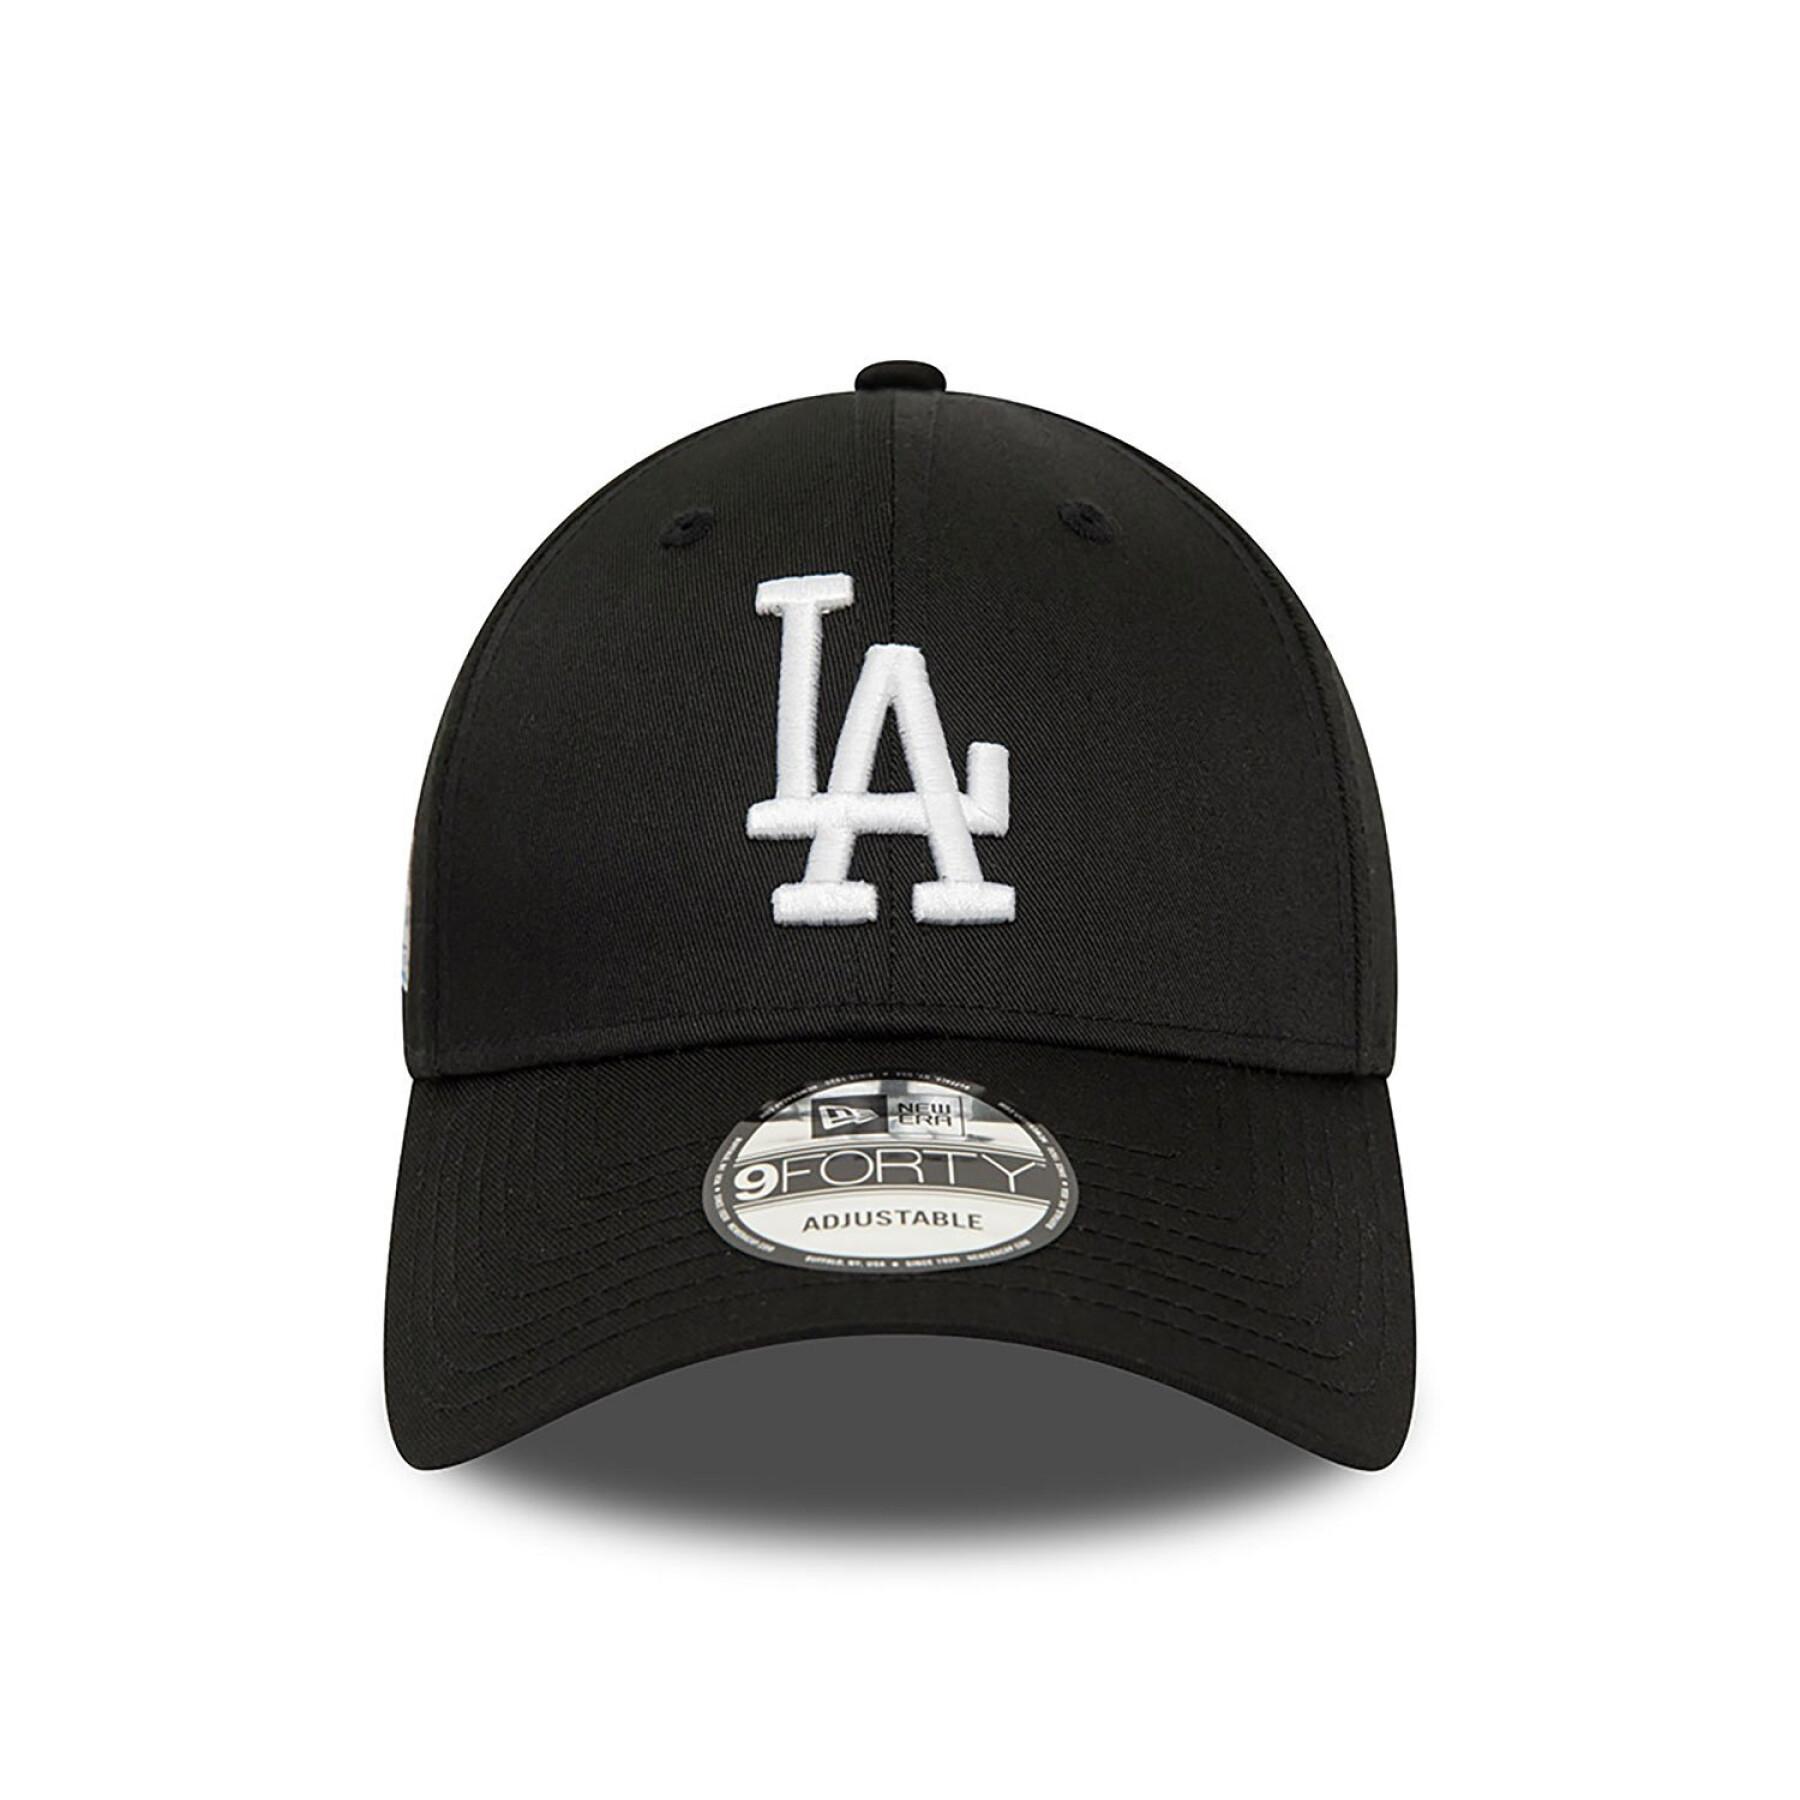 Casquette 9forty Los Angeles Dodgers Patch